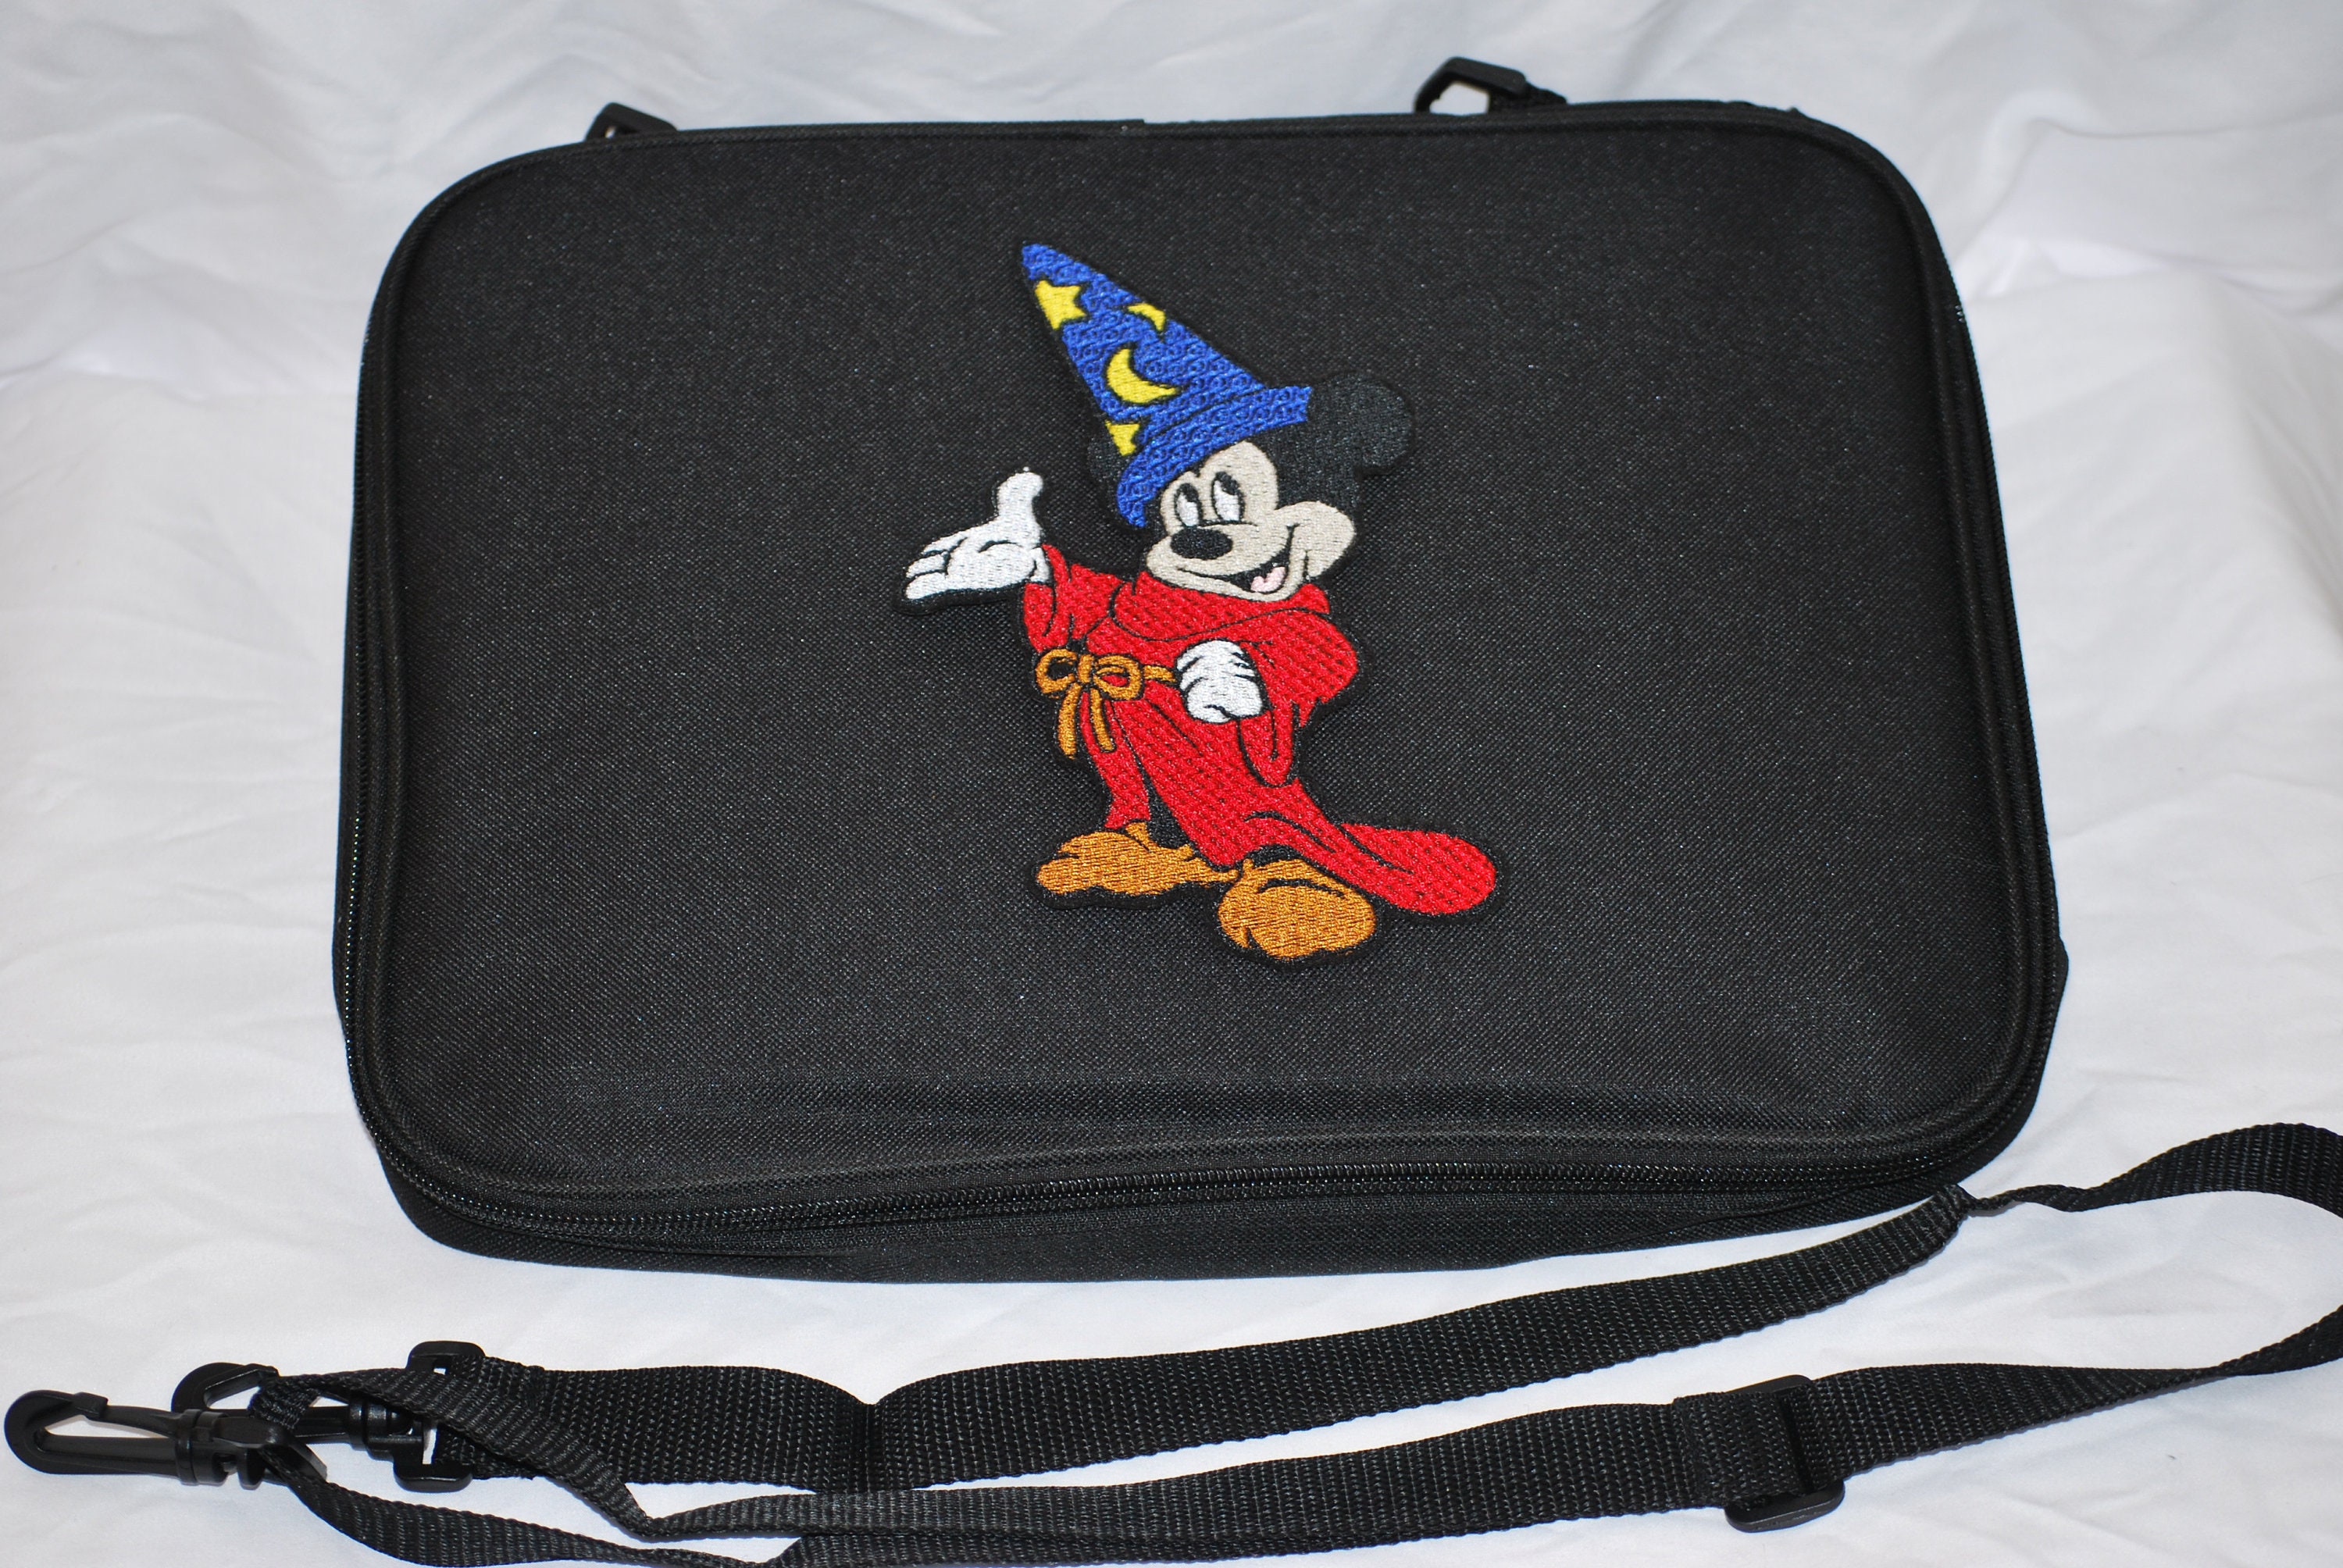 NEW Embroidery Steamboat Willie Aka Mickey Mouse Pin Trading Book Bag Large  for Disney Pin Collections Holds About 300 Pins FREE SHIP 